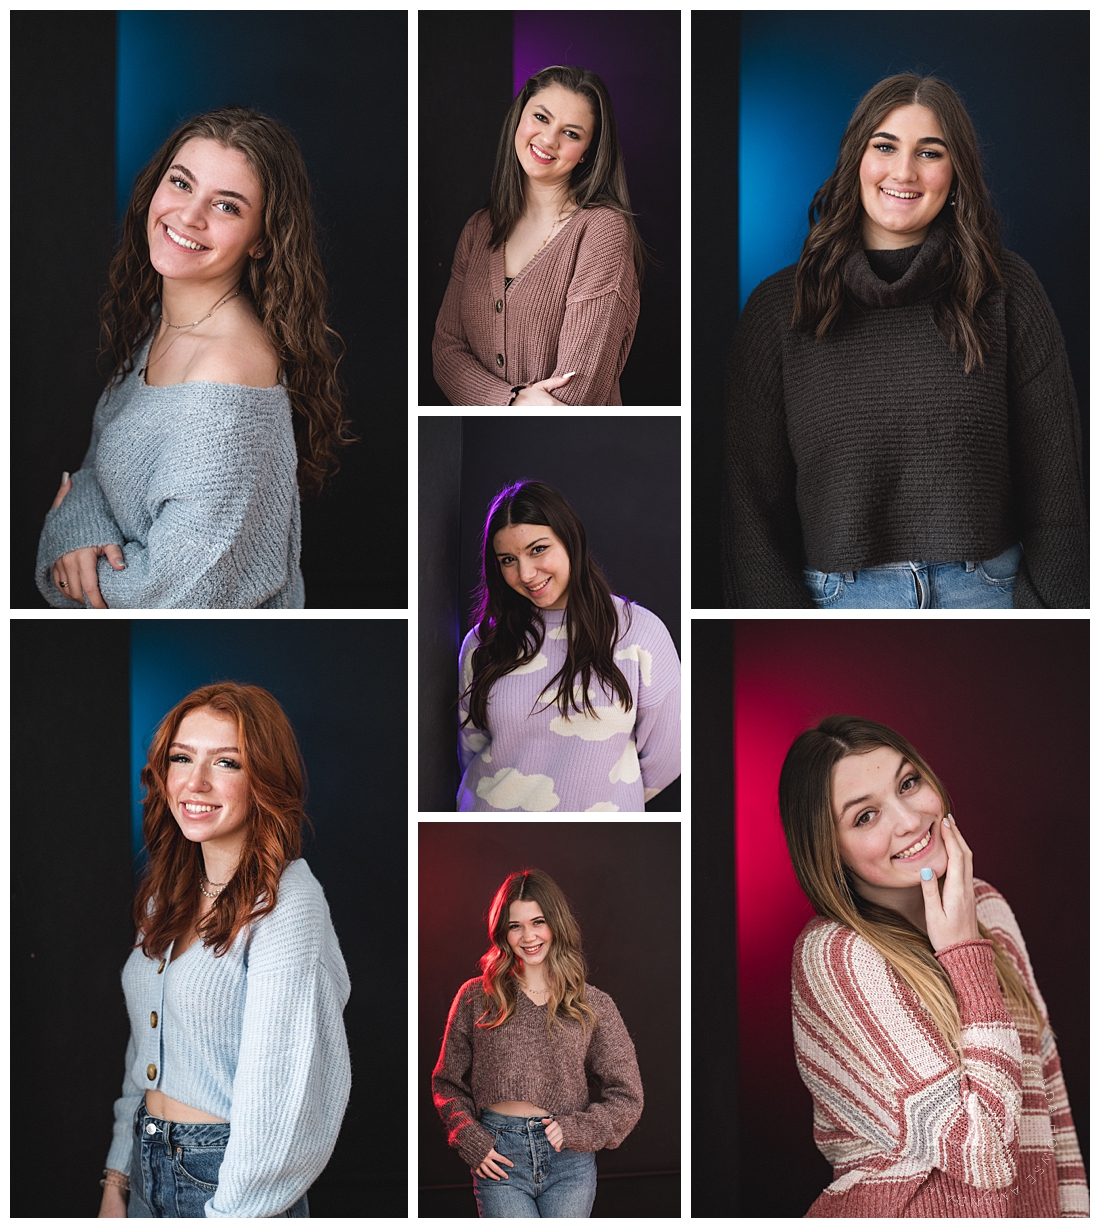 Compilation of Studio Lights Portrait Session | Cute Sweater Selections, AHP Model Team 2022 | Photographed by the Best Tacoma Senior Portrait Photographer Amanda Howse Photography